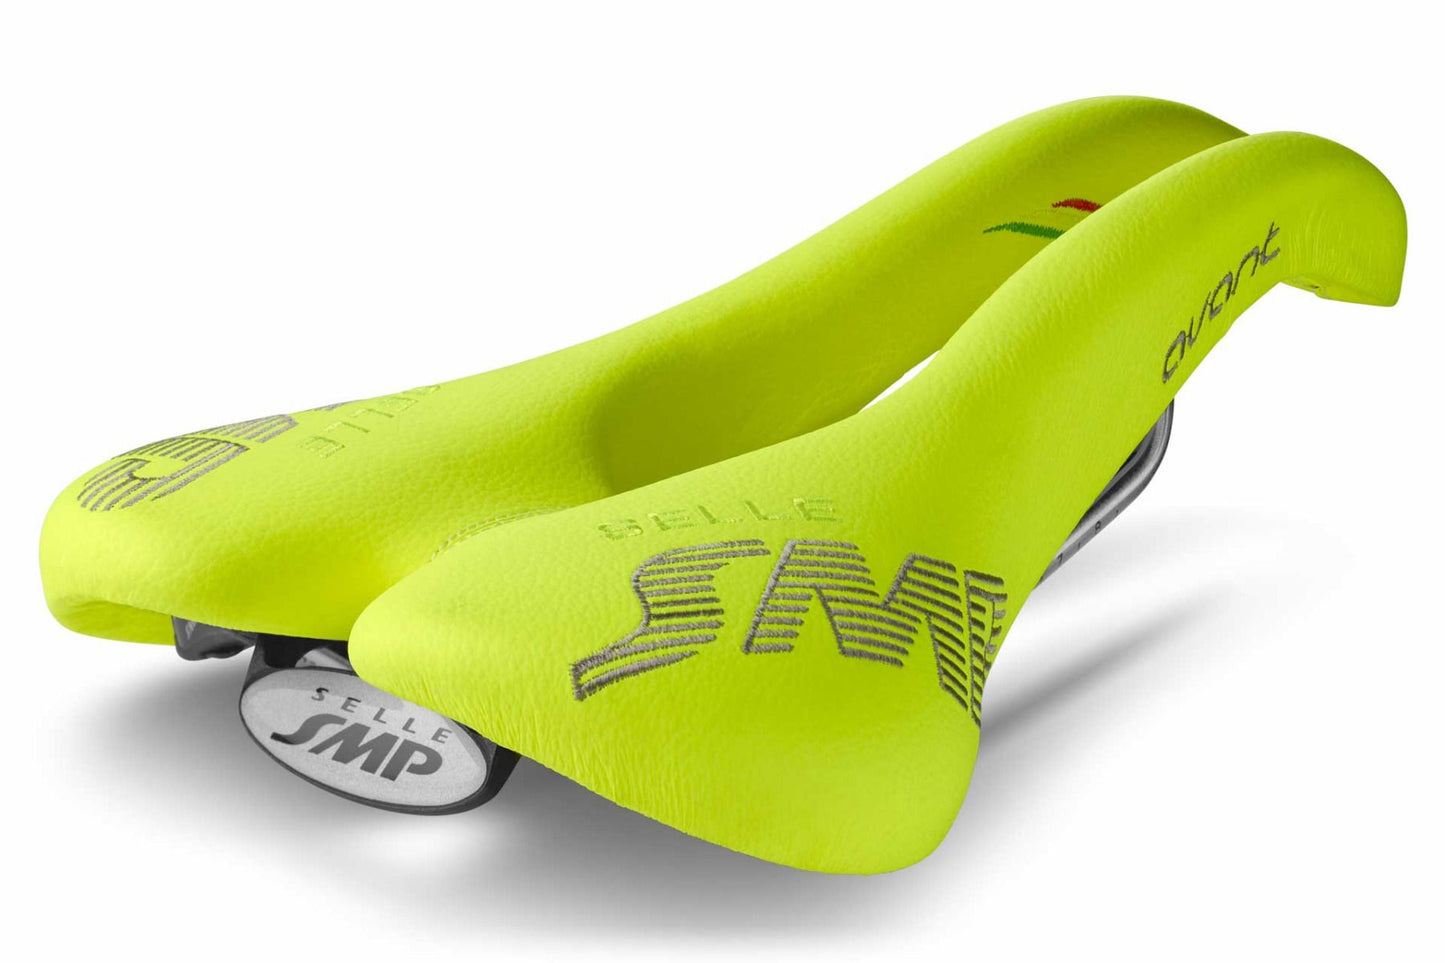 Selle SMP Avant Saddle with Stainless Steel Rails (Fluro Yellow)